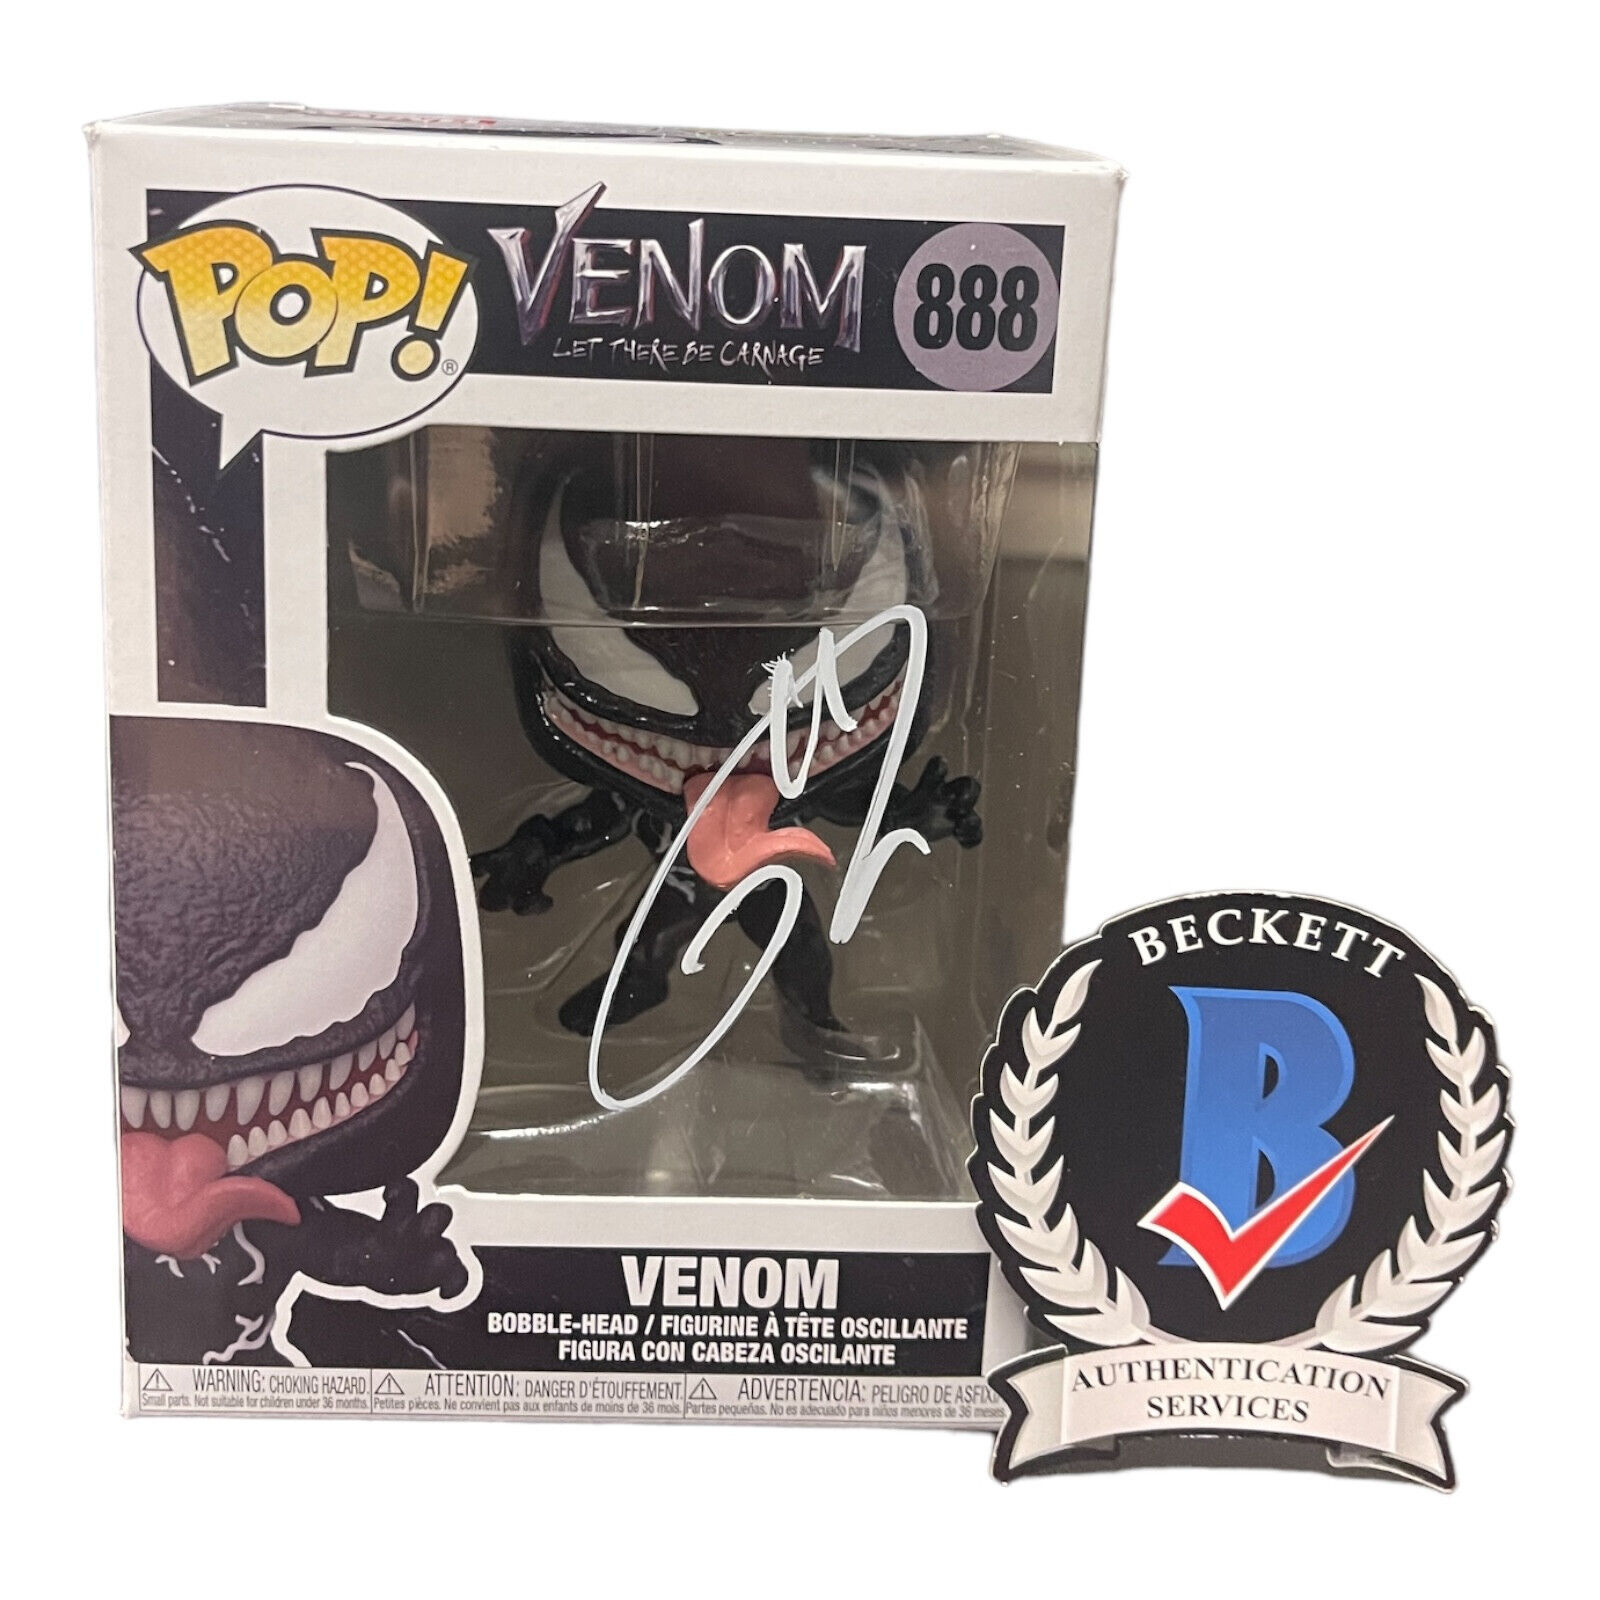 Tom Hardy Signed Autograph Venom Let There Be Carnage Funko Pop 888 Beckett BAS